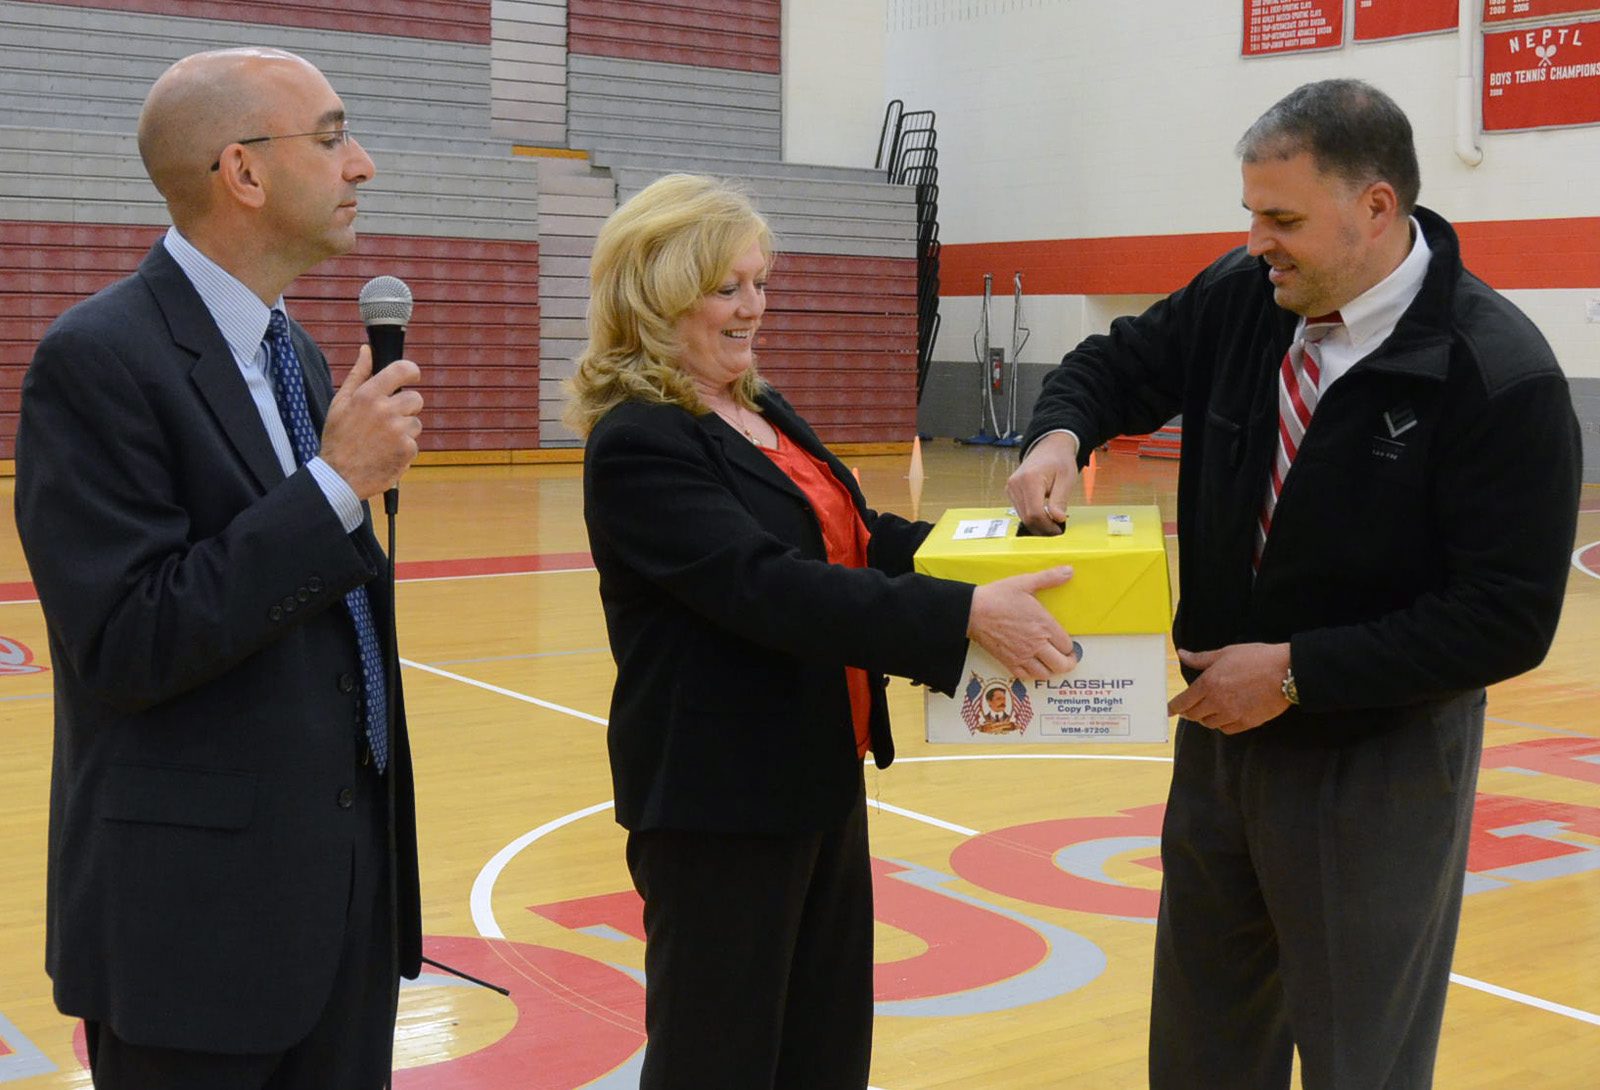 Attorney Christopher Slusser picks a winning name during the Hazleton Area School District's Prom Promise assembly.